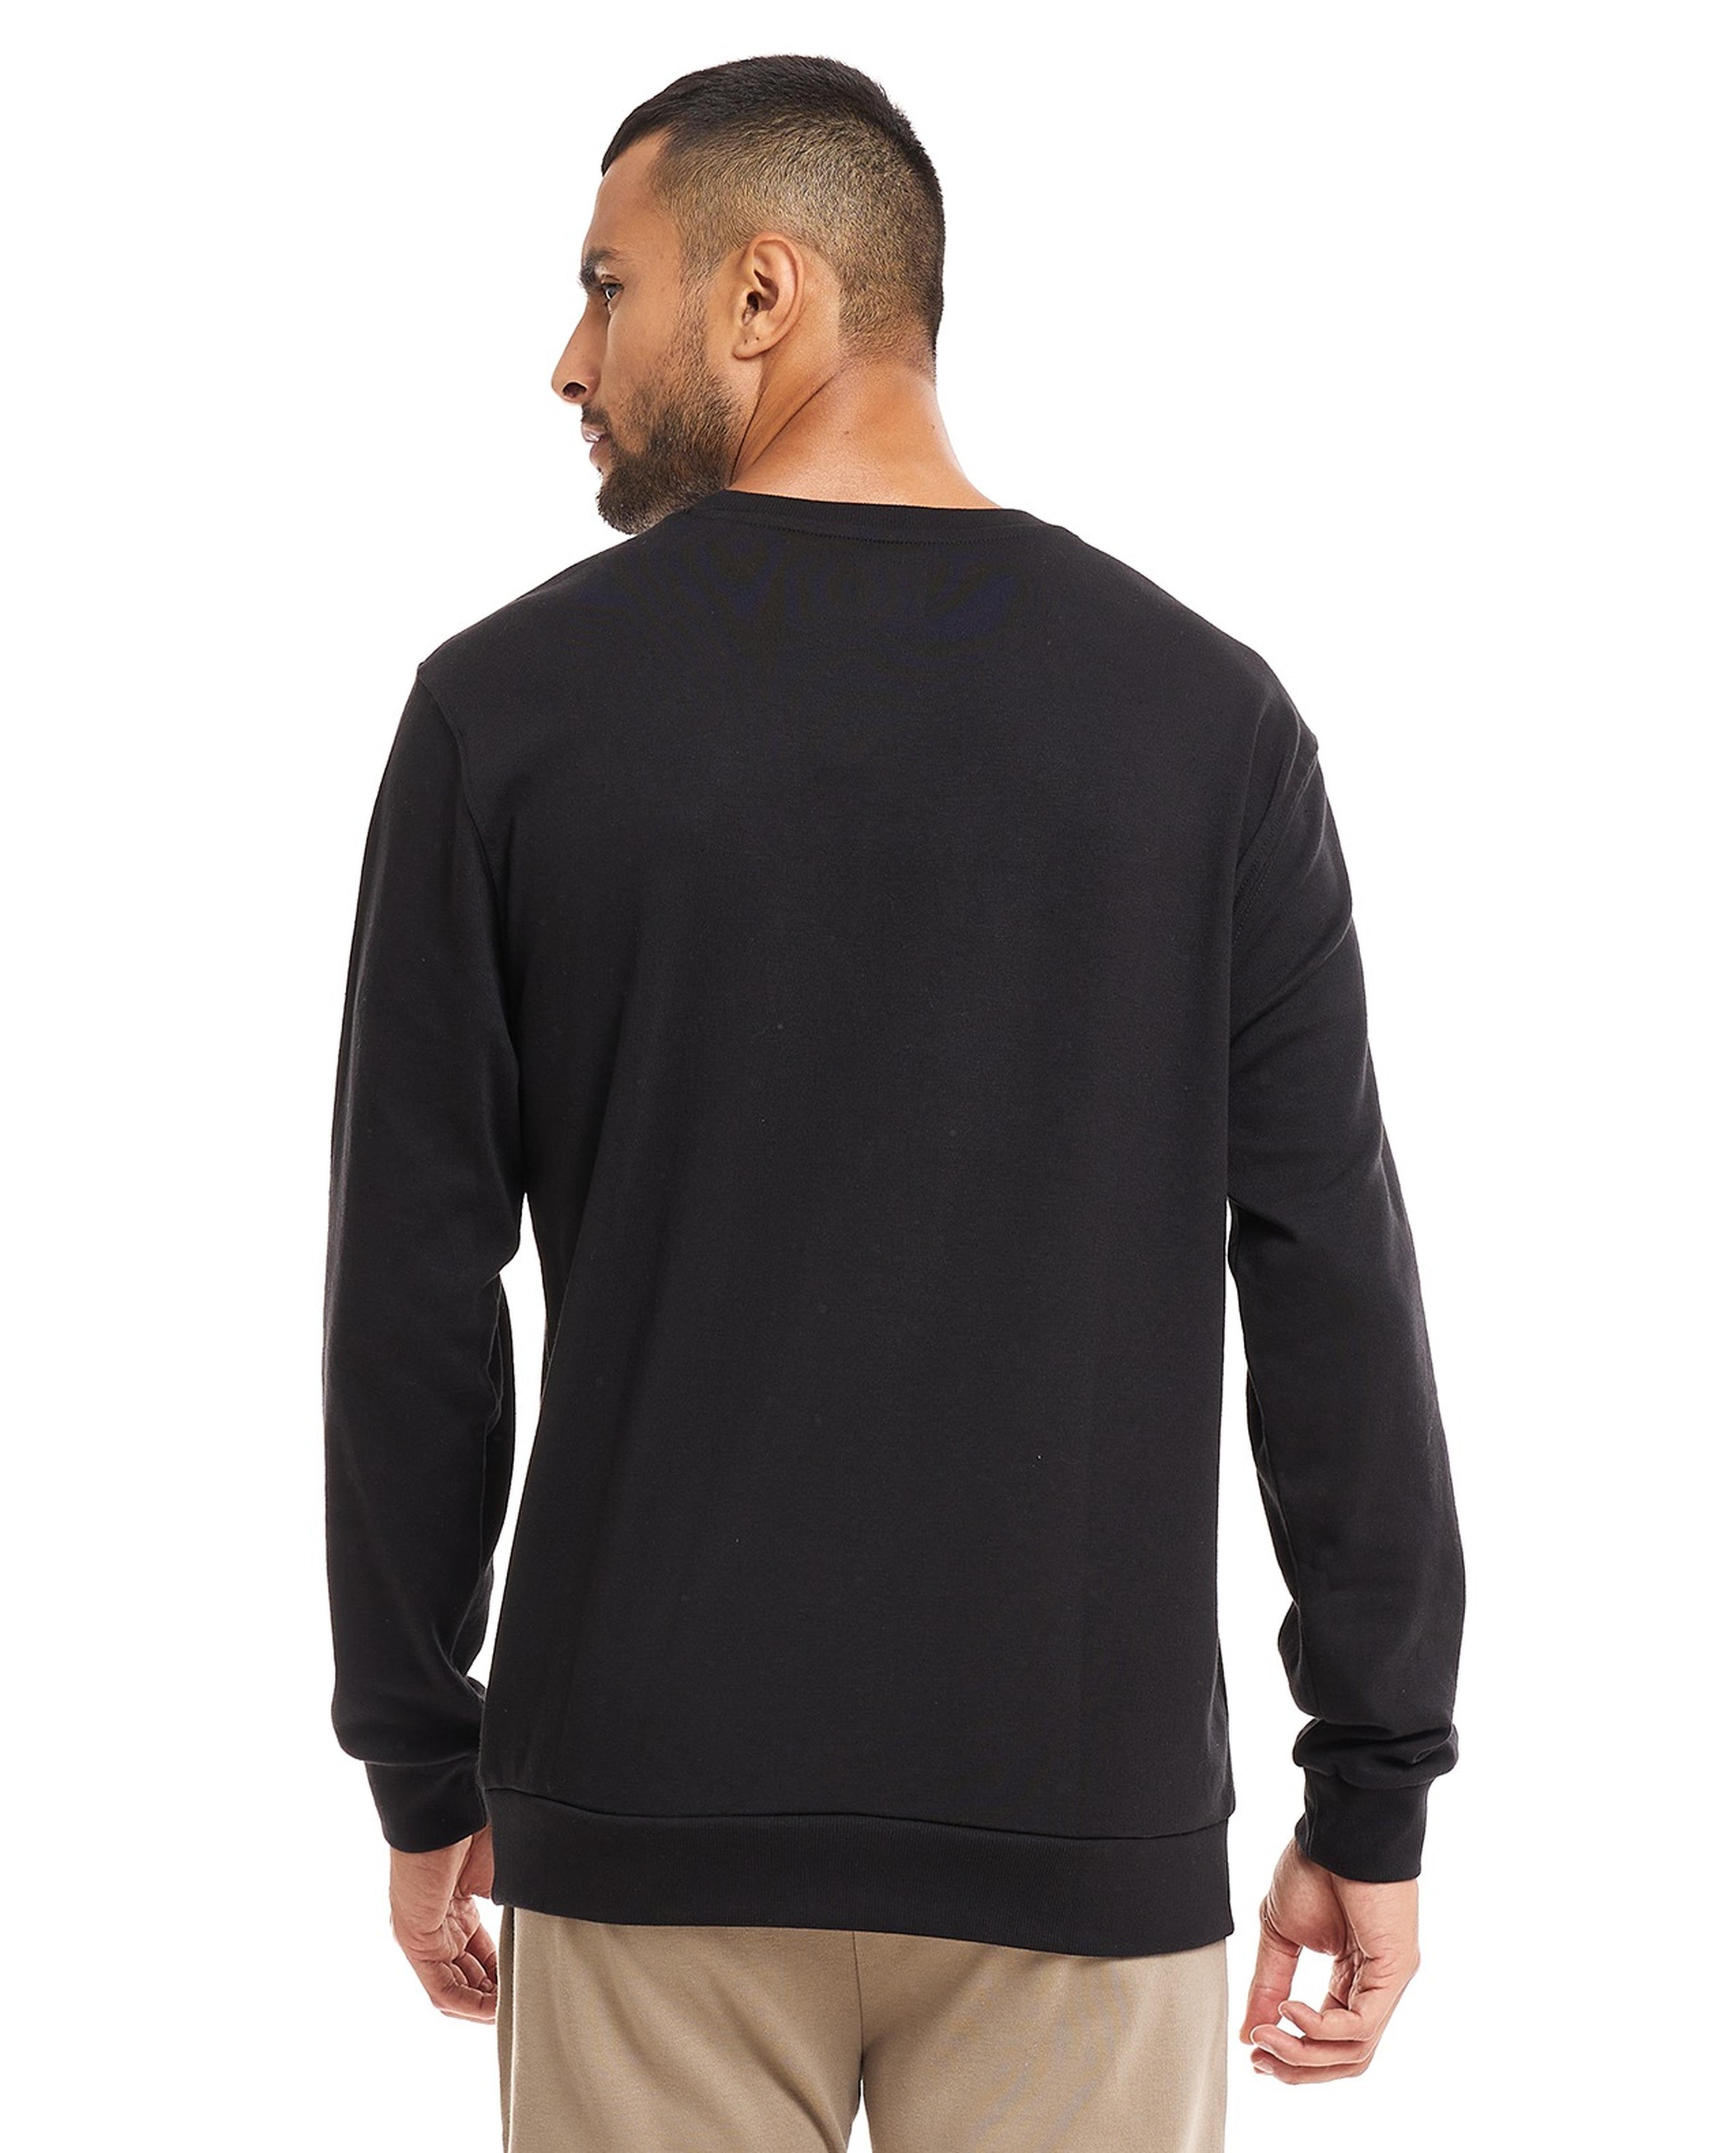 Print Detail Sweatshirt with Crew Neck and Long Sleeves